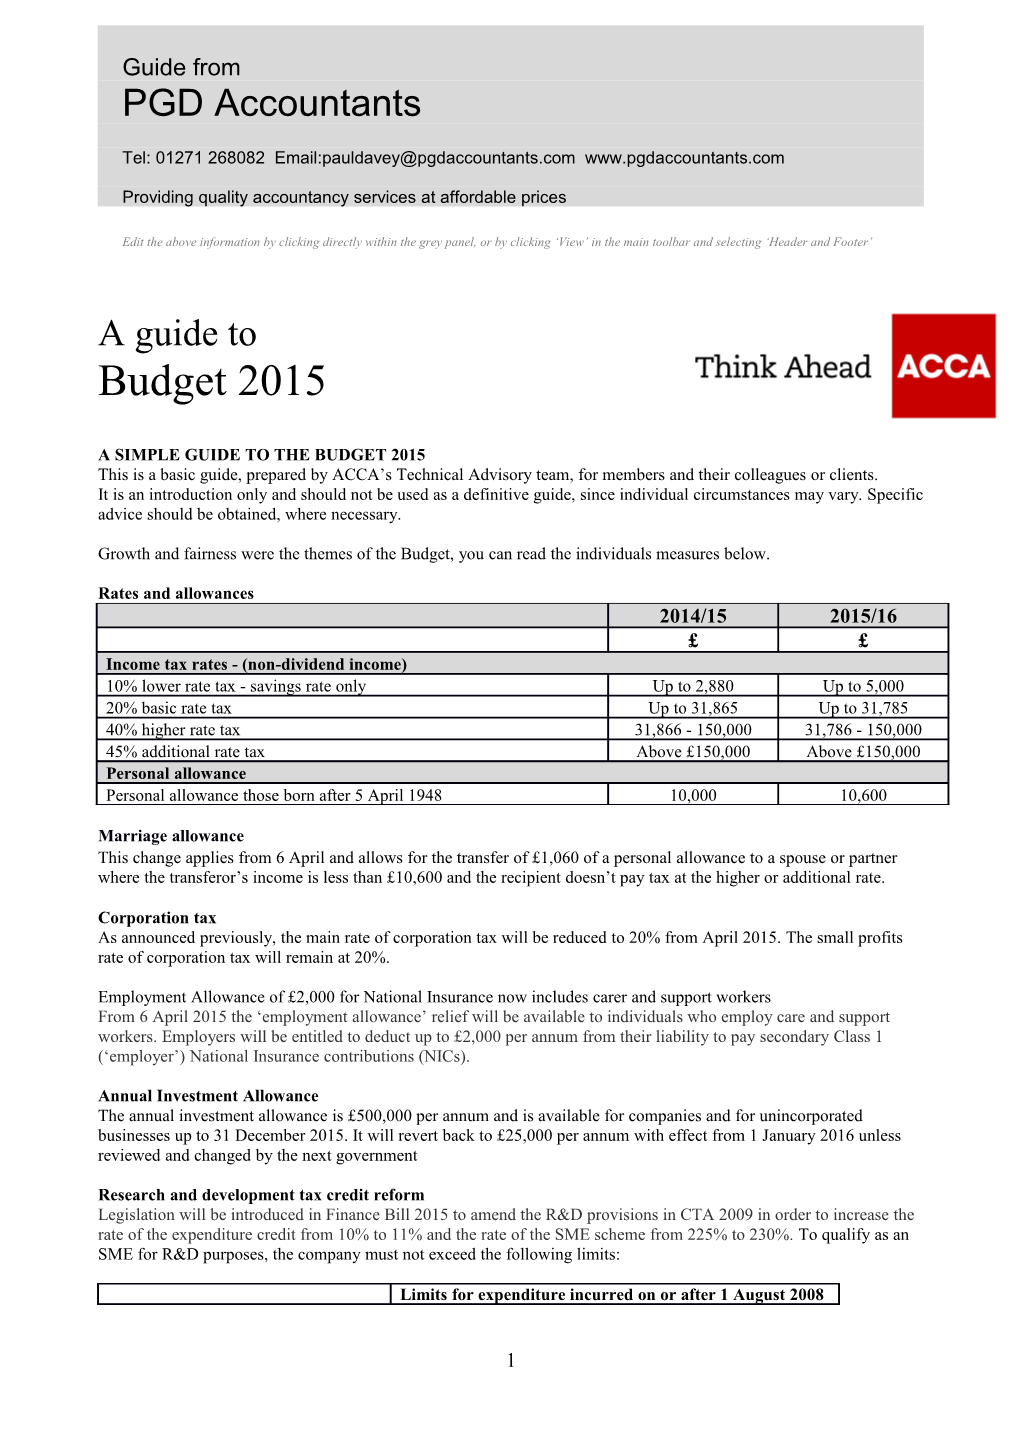 A Simple Guide to the Budget 2015